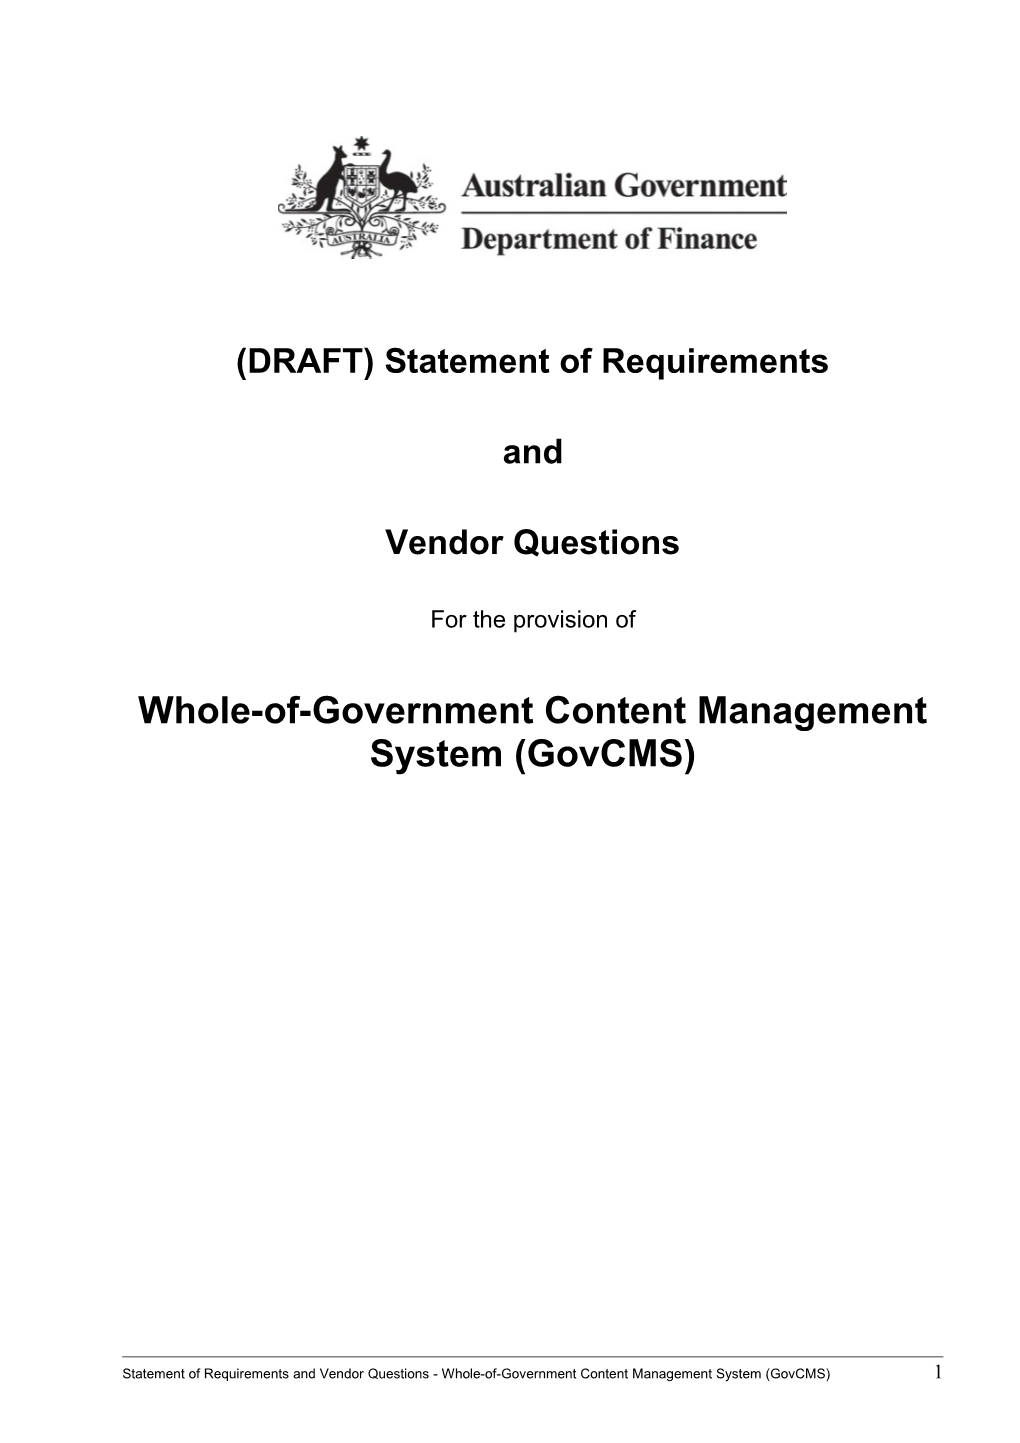 (DRAFT) Statement of Requirements and Vendor Questions